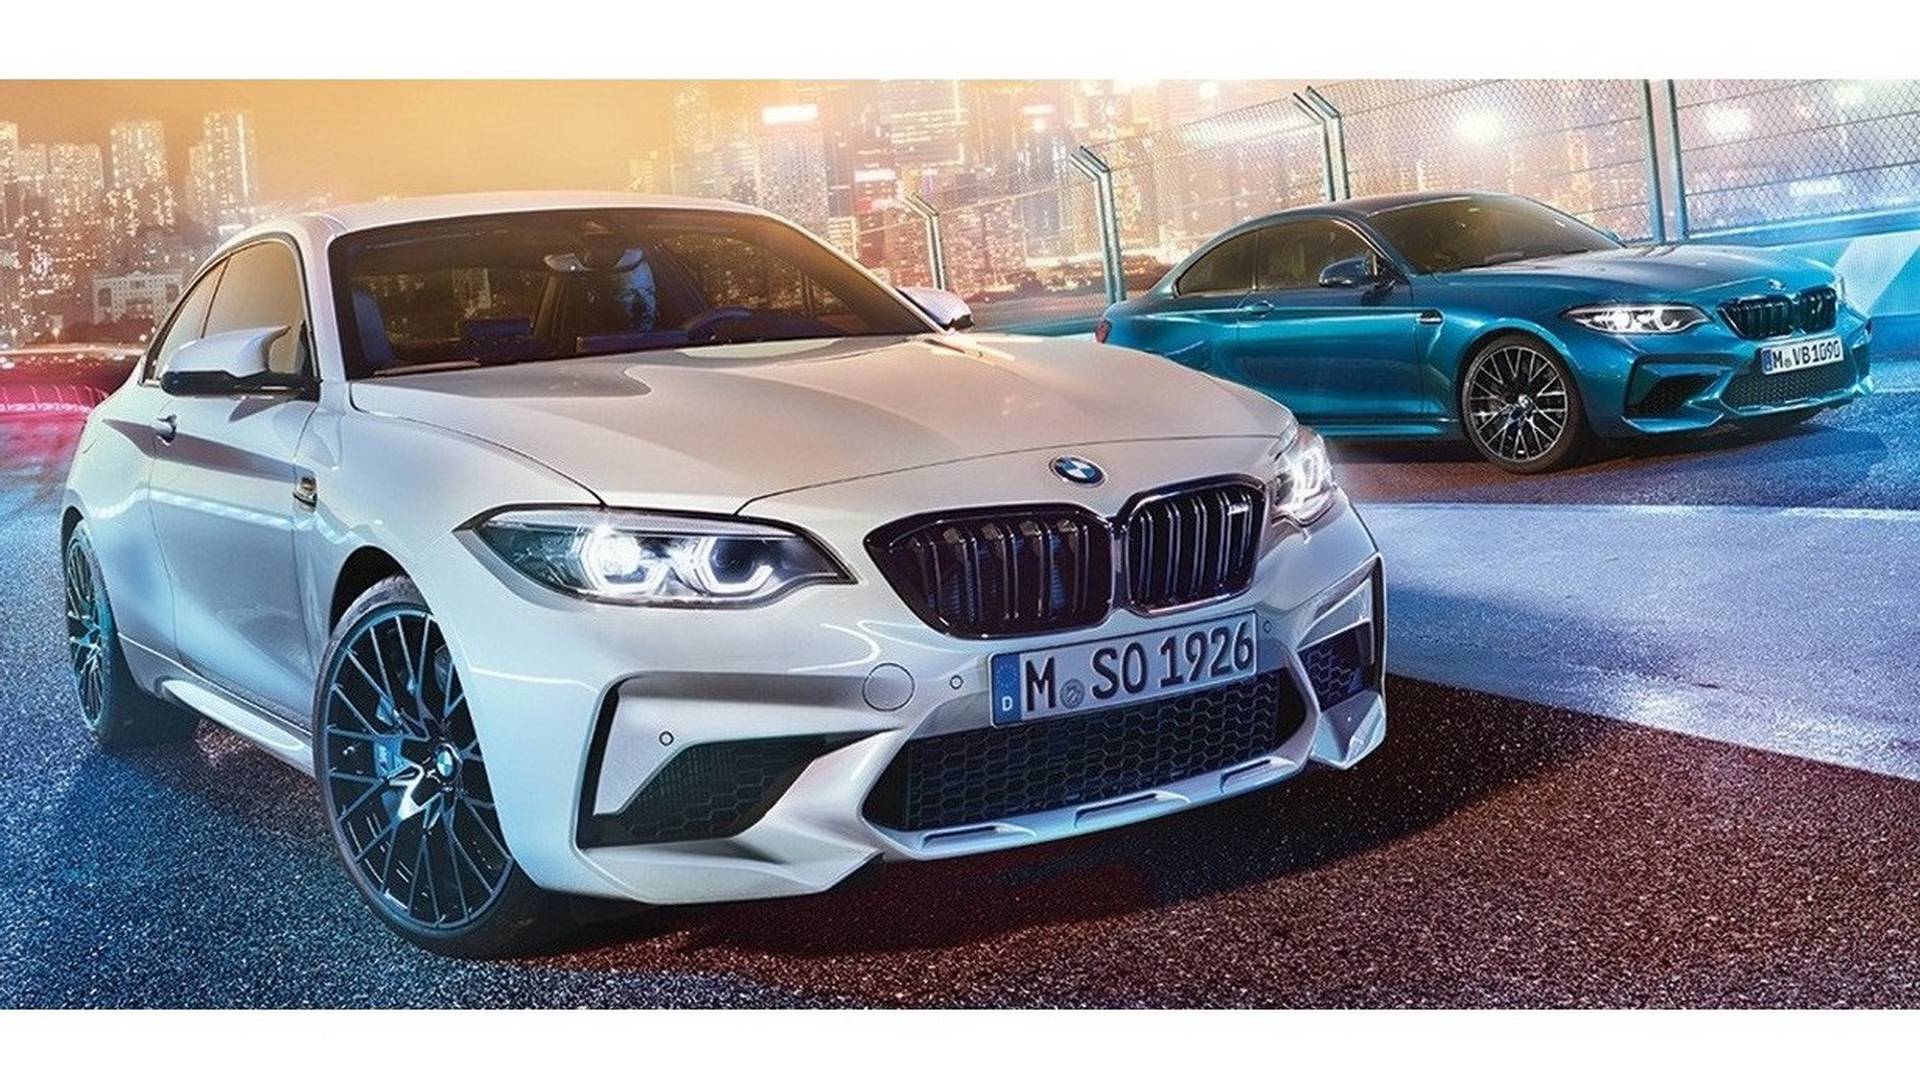 Leaked Specs Suggest BMW M2 Competition Has 404 HP, 406 Lb Ft